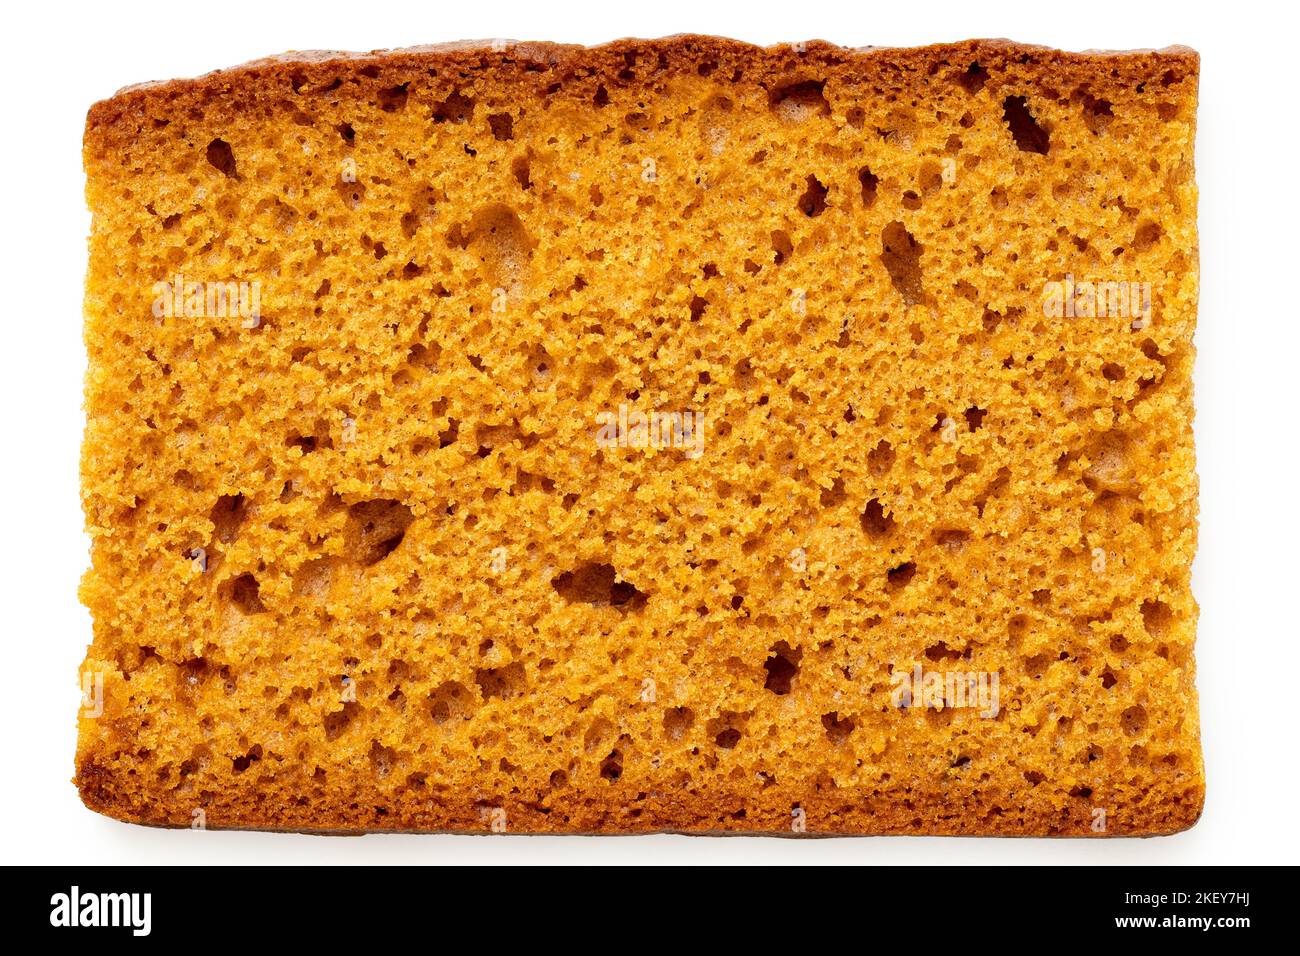 Slice of spiced honey cake isolated on white. Top view. Stock Photo